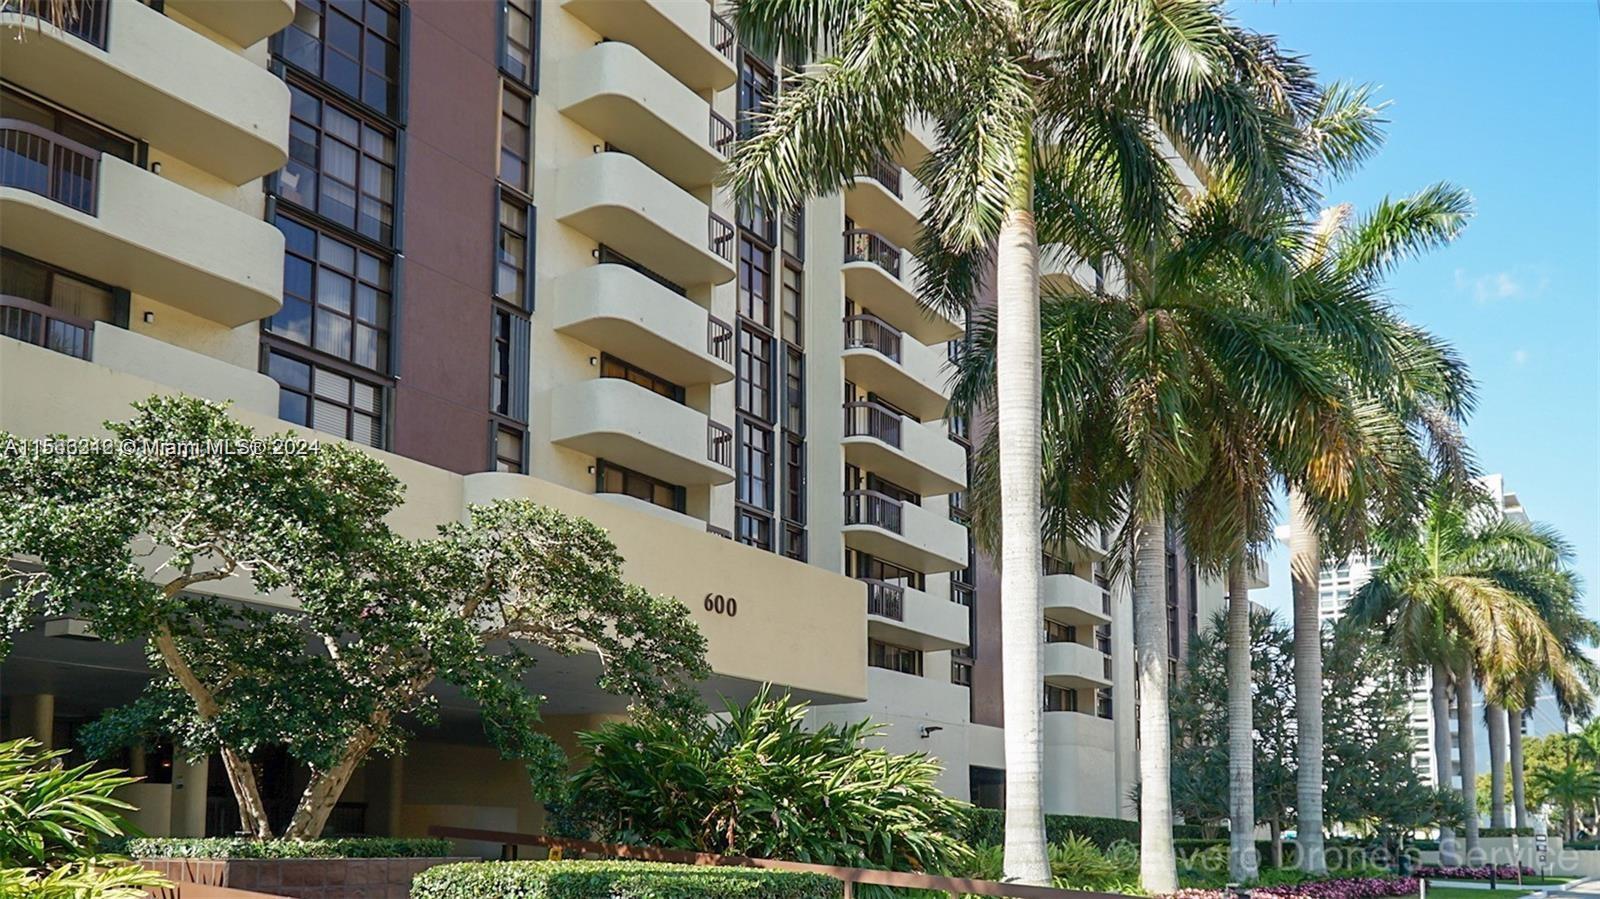 Photo of 600 Biltmore Wy #1014 in Coral Gables, FL